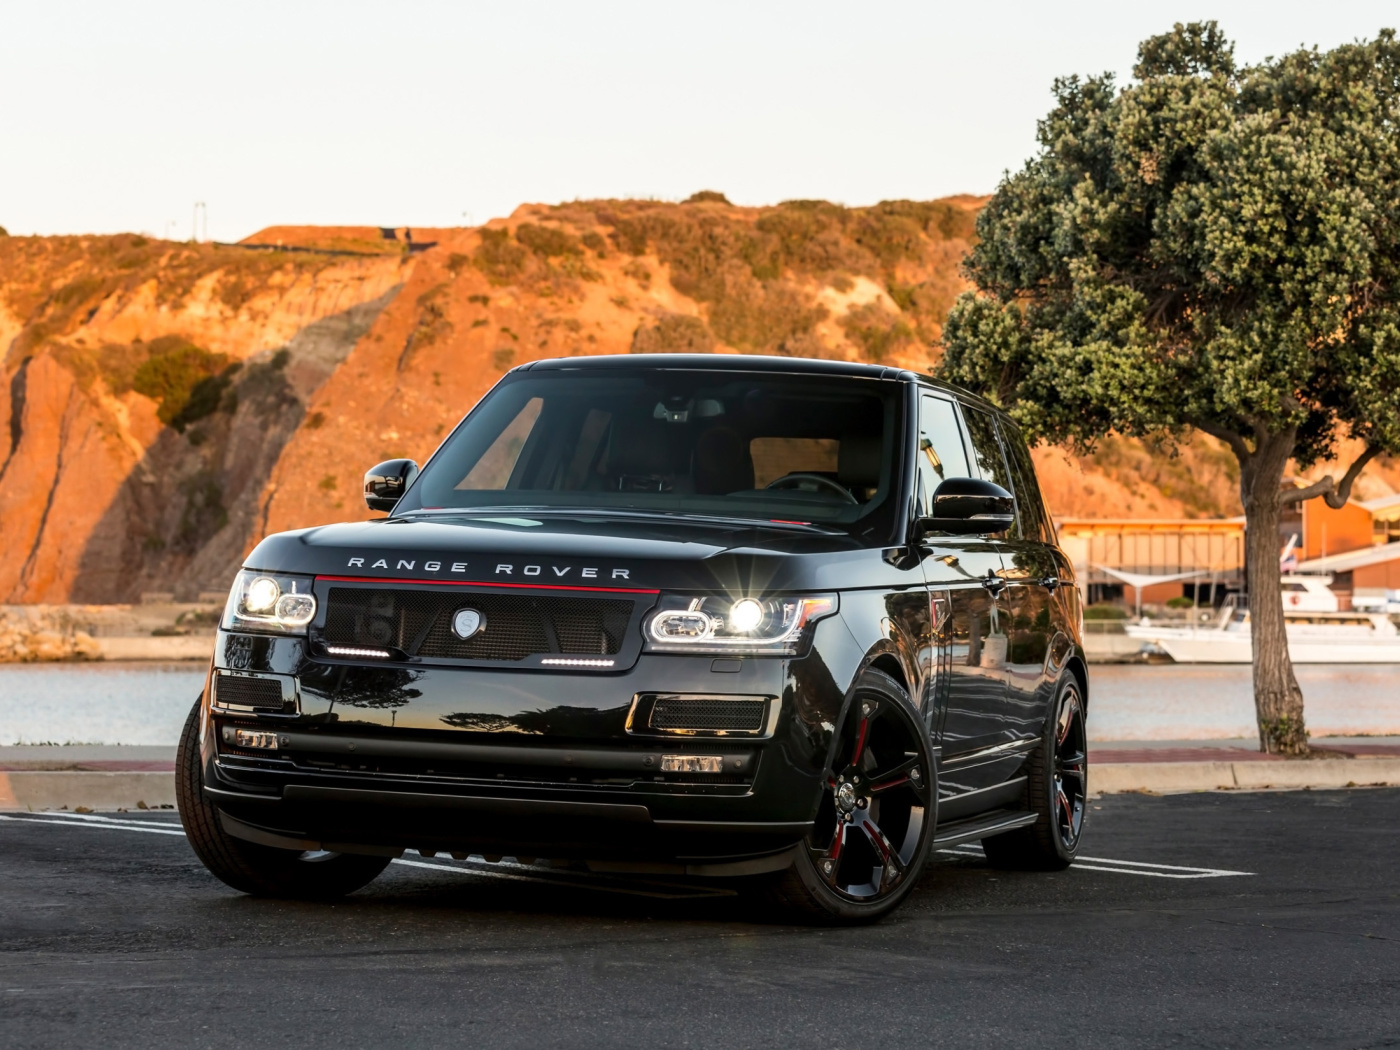 Das Range Rover STRUT with Grille Package Wallpaper 1400x1050